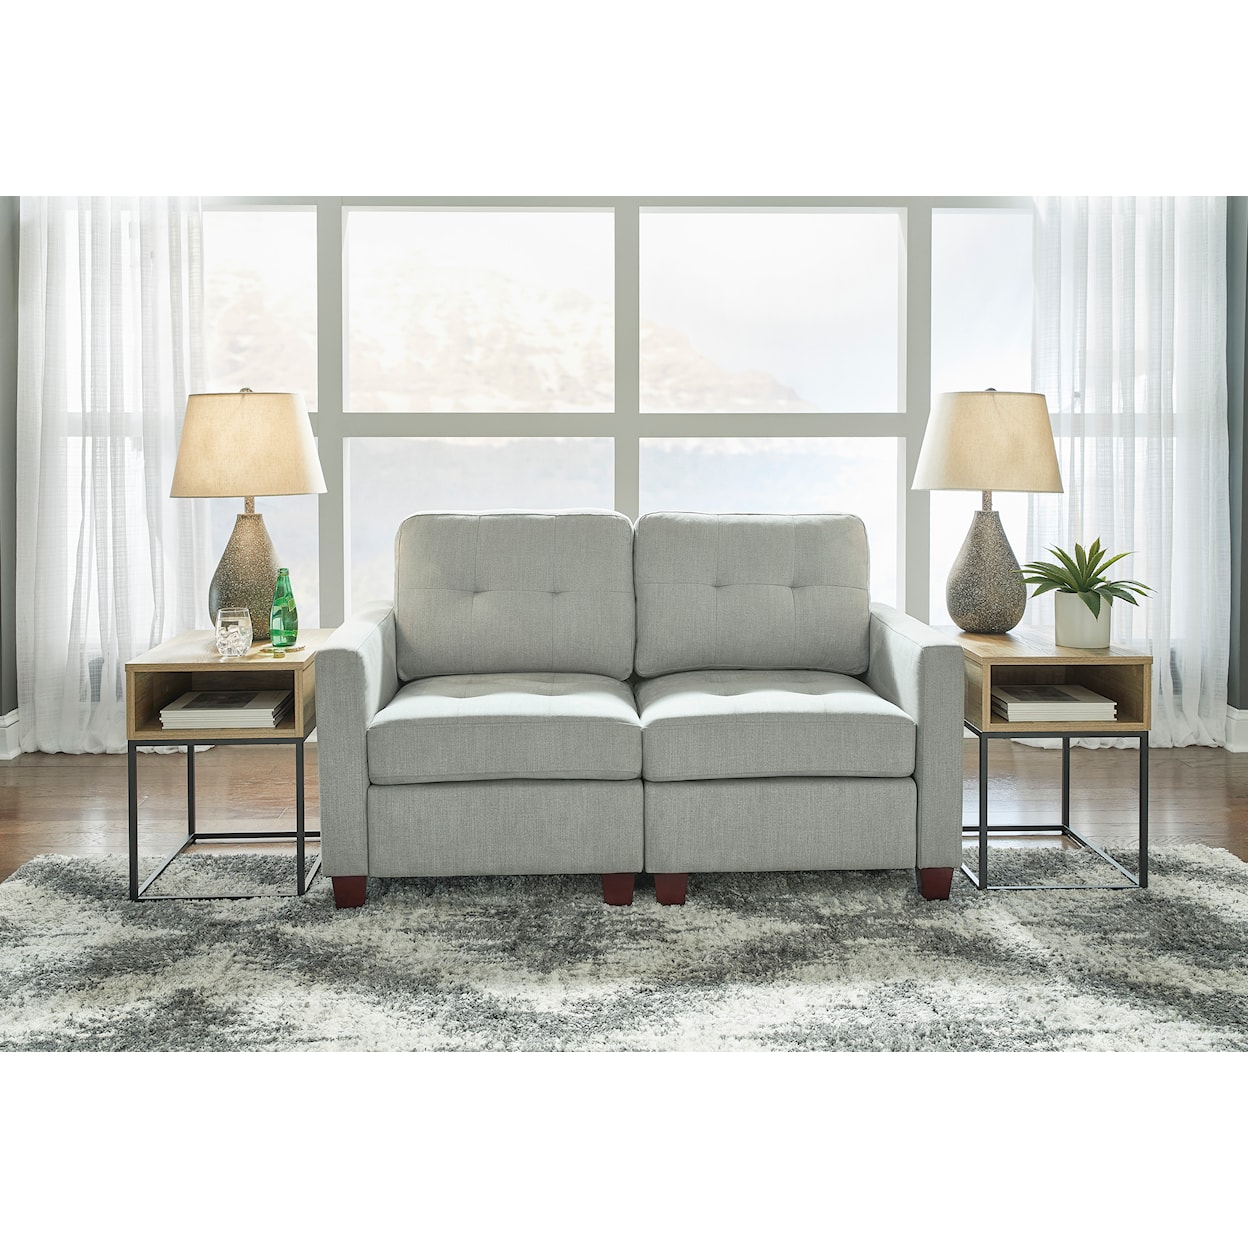 Signature Design by Ashley Edlie 2-Piece Sectional